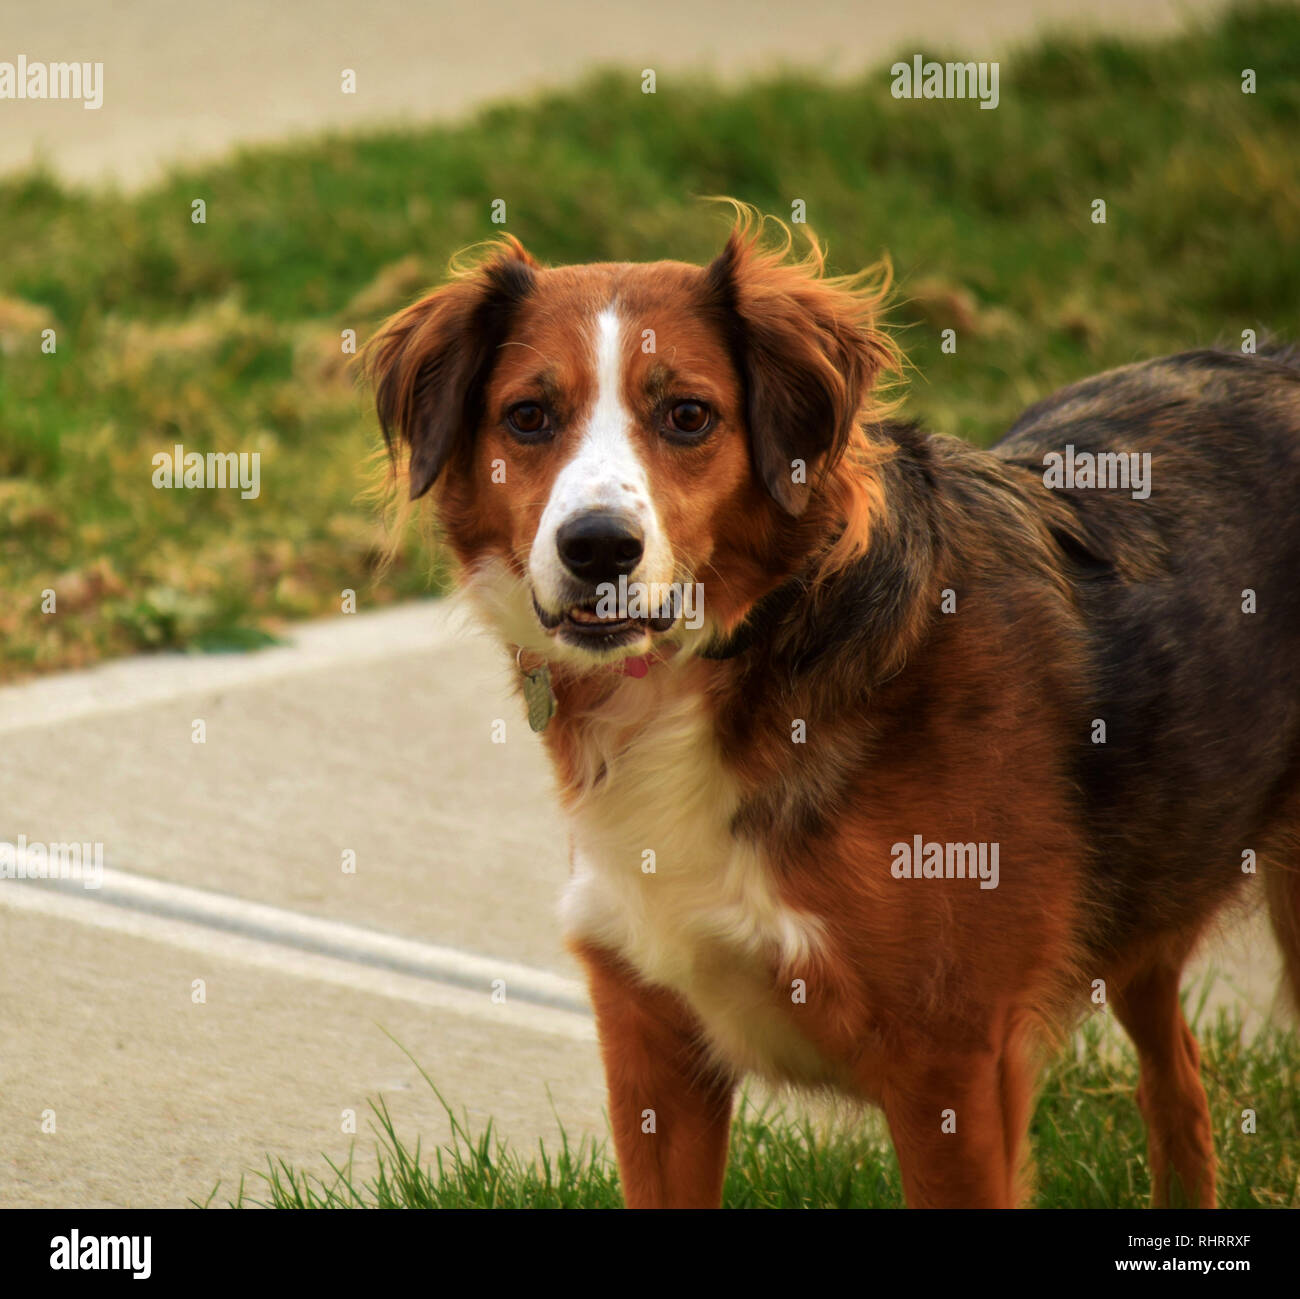 Mixed Australian Shepherd Dog High Resolution Stock Photography And Images Alamy